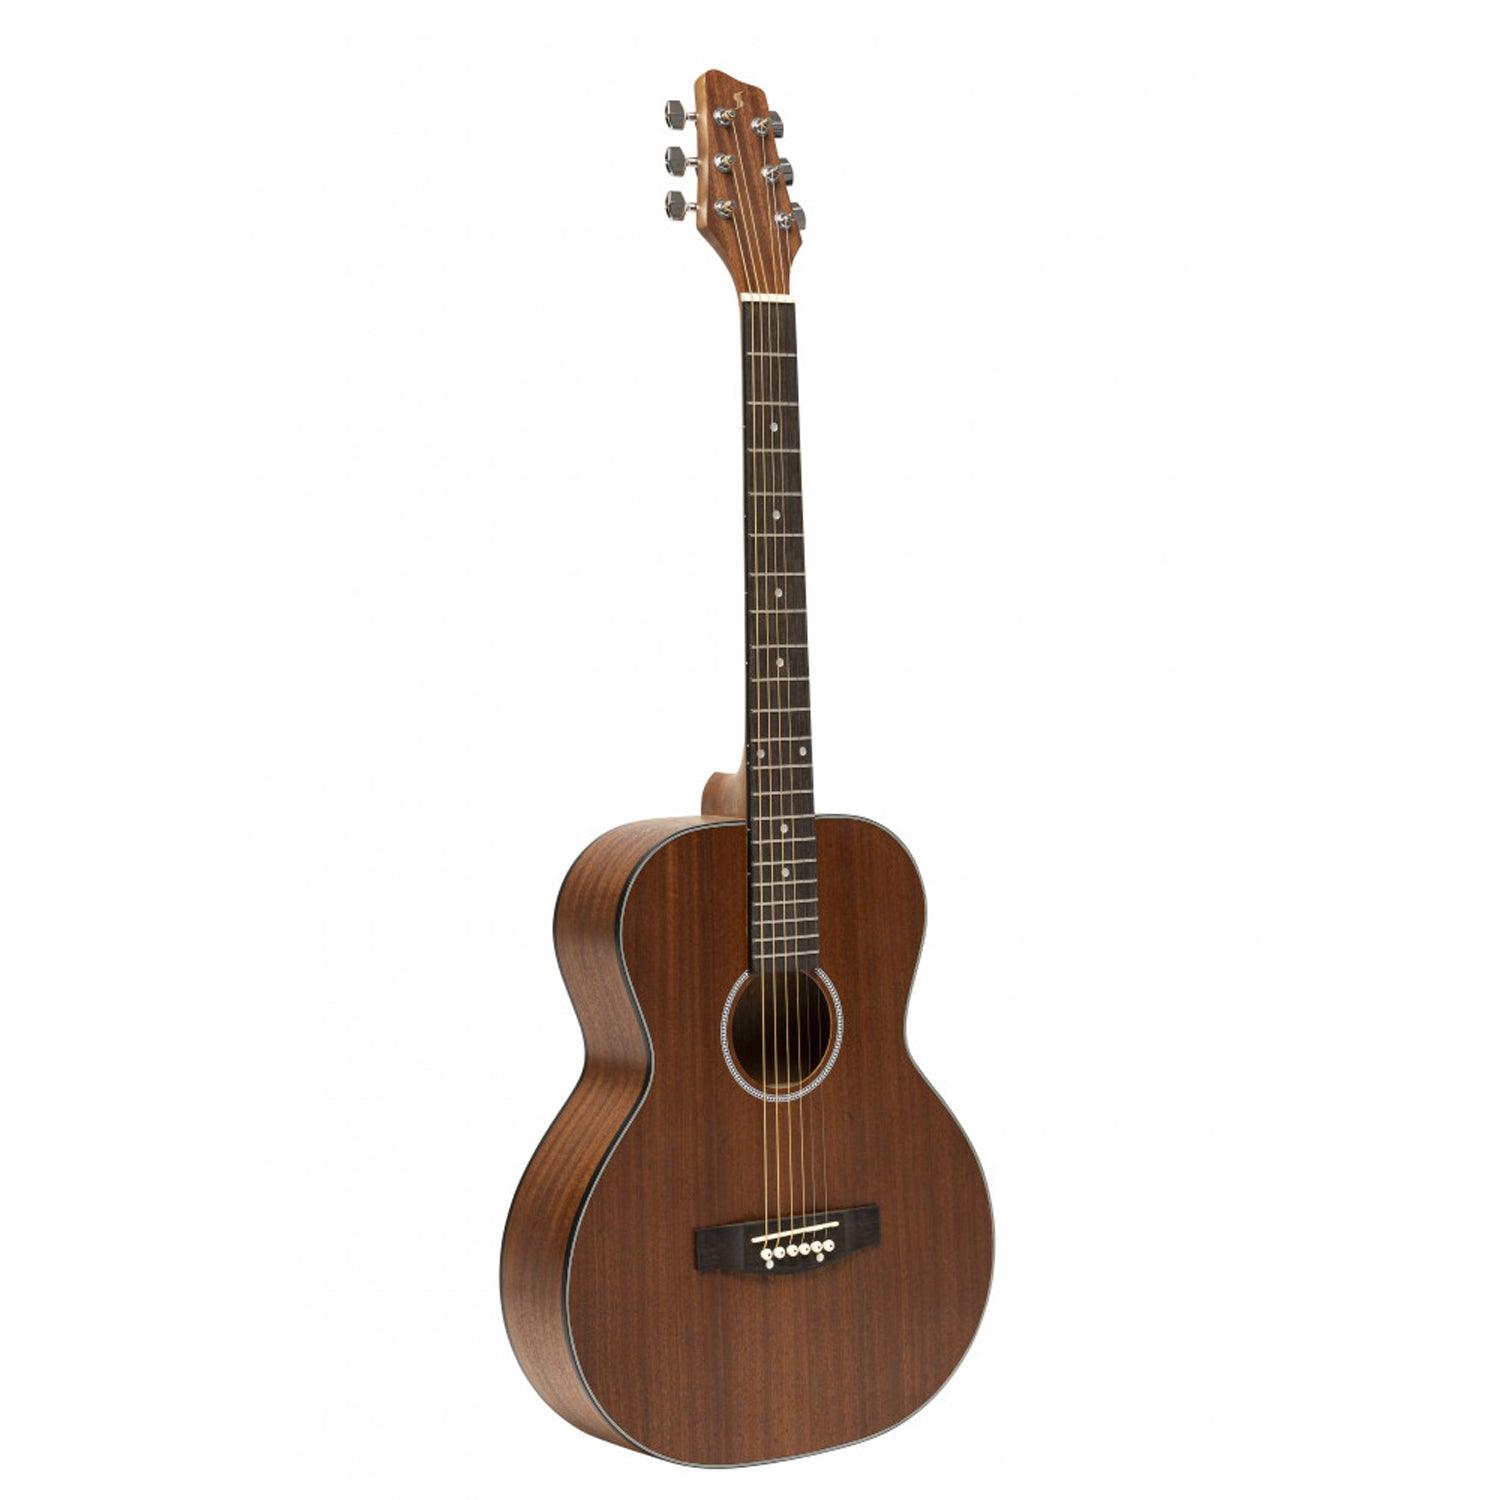 Stagg SA25 A MAHO Acoustic Auditorium Guitar, Sapele, Natural Finish - DY Pro Audio